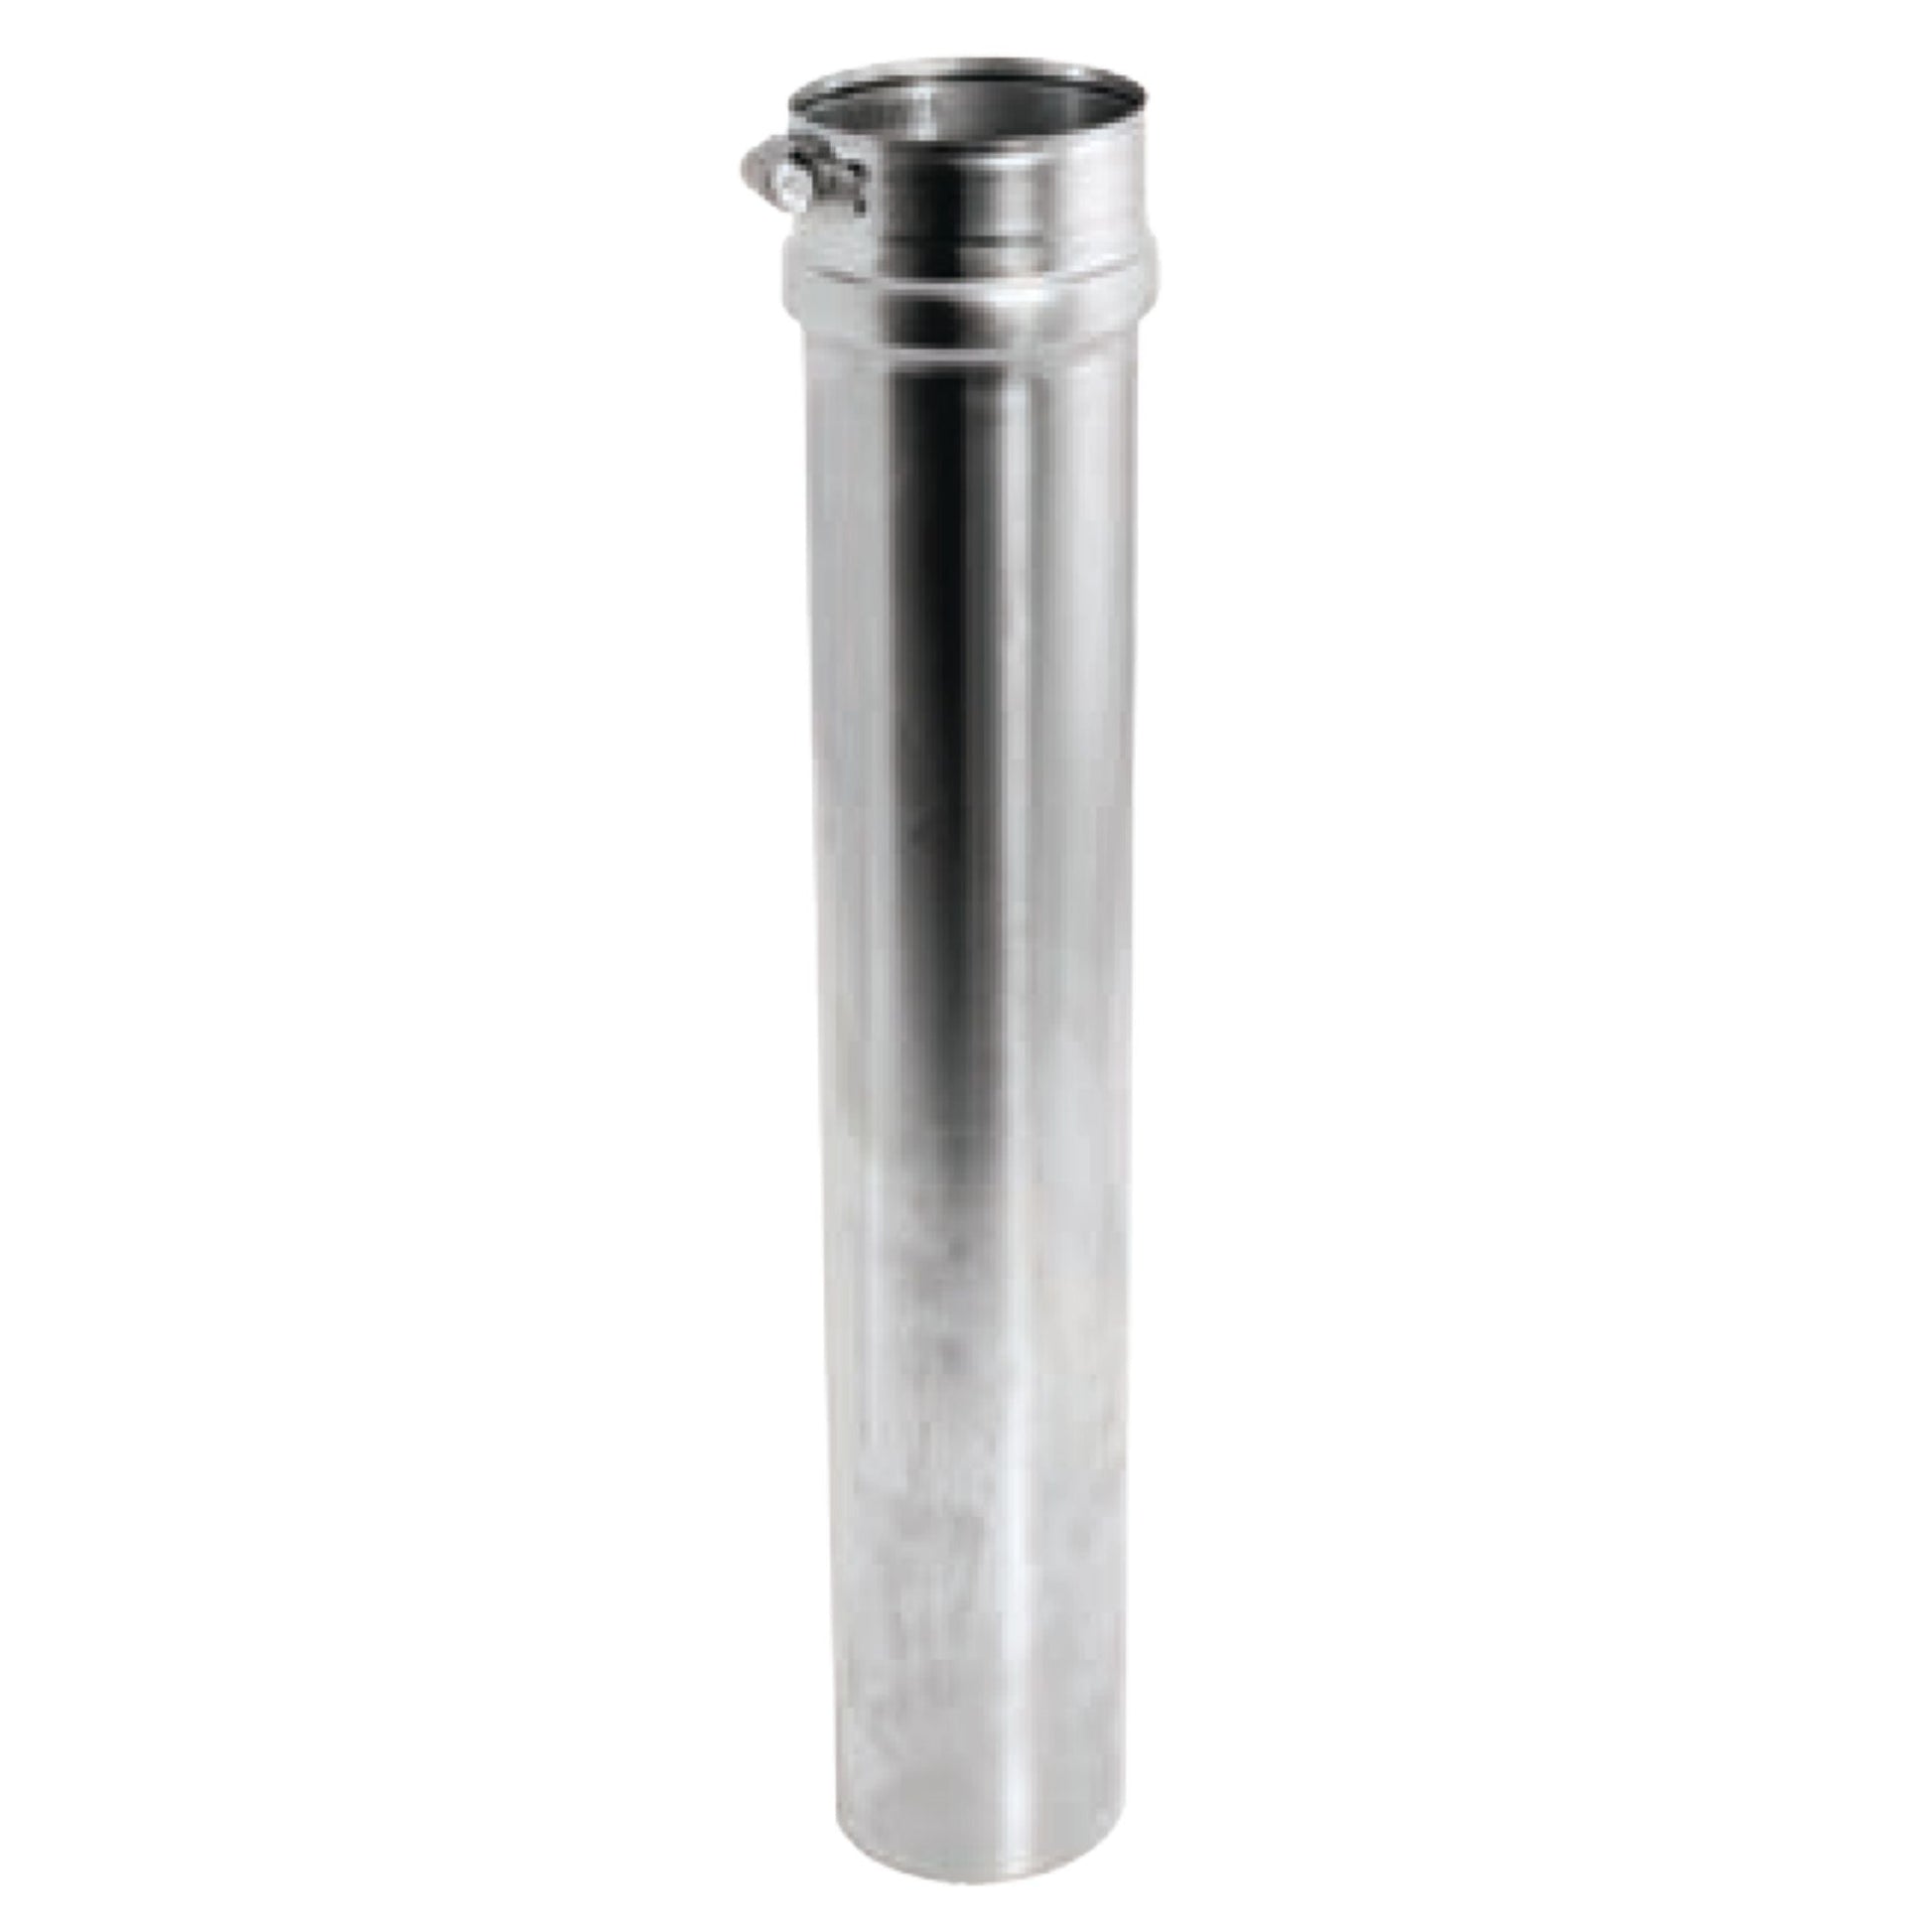 DuraVent FasNSeal 4" x 18" 29-4C Stainless Steel Adjustable Vent Length